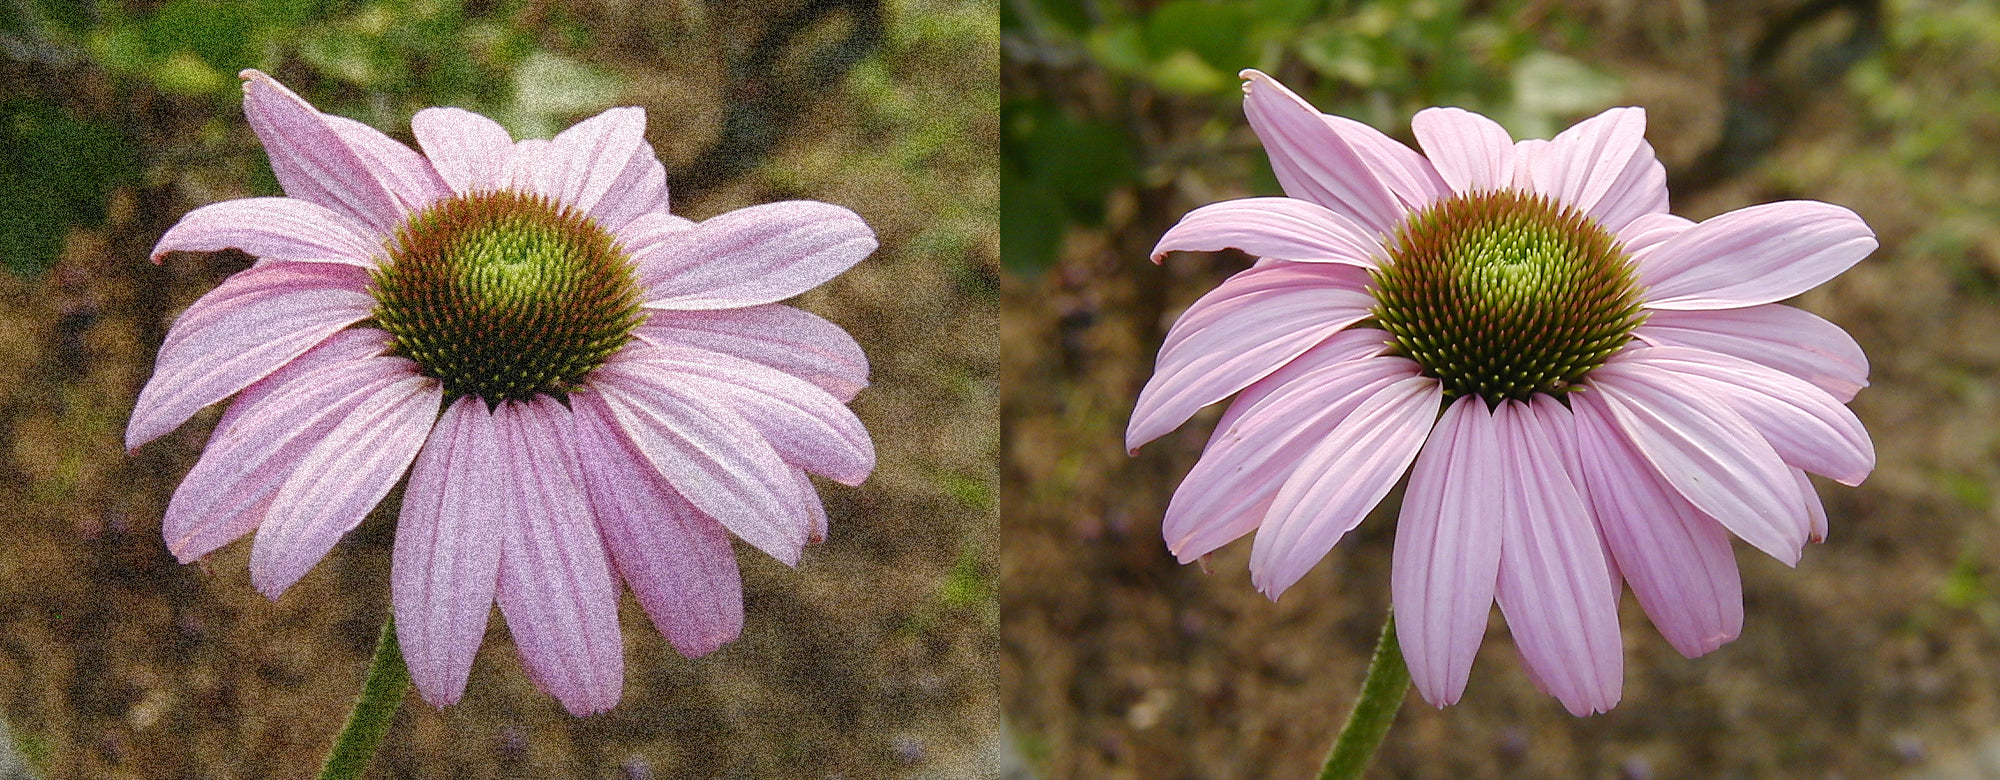 Two pictures of a pink flower with green leaves.